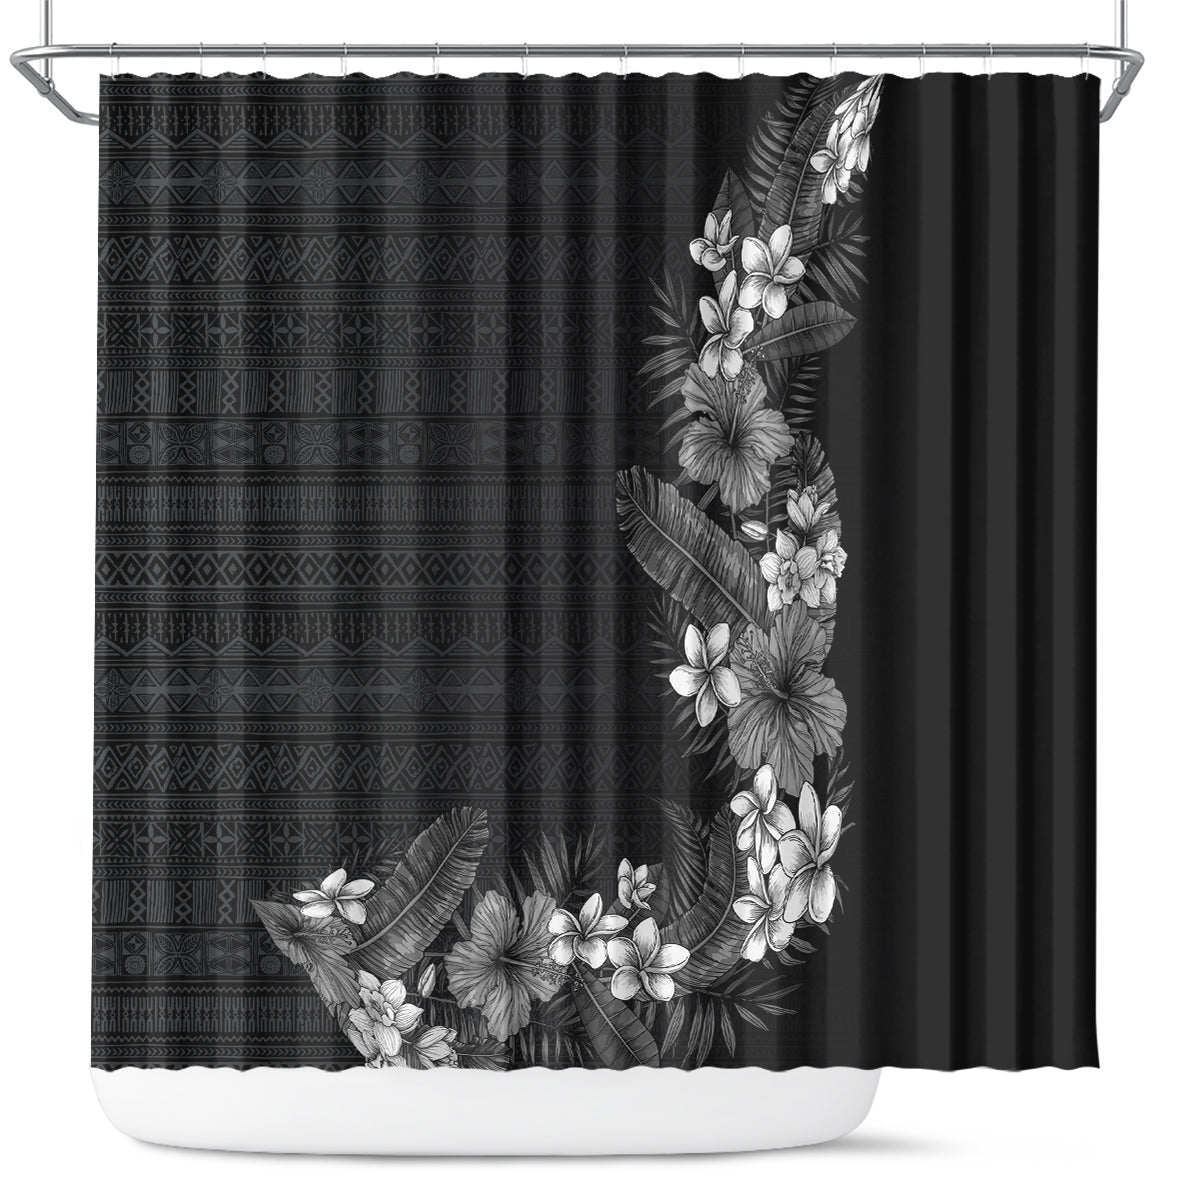 Hawaii Tropical Flowers and Leaves Shower Curtain Tapa Pattern Grayscale Mode